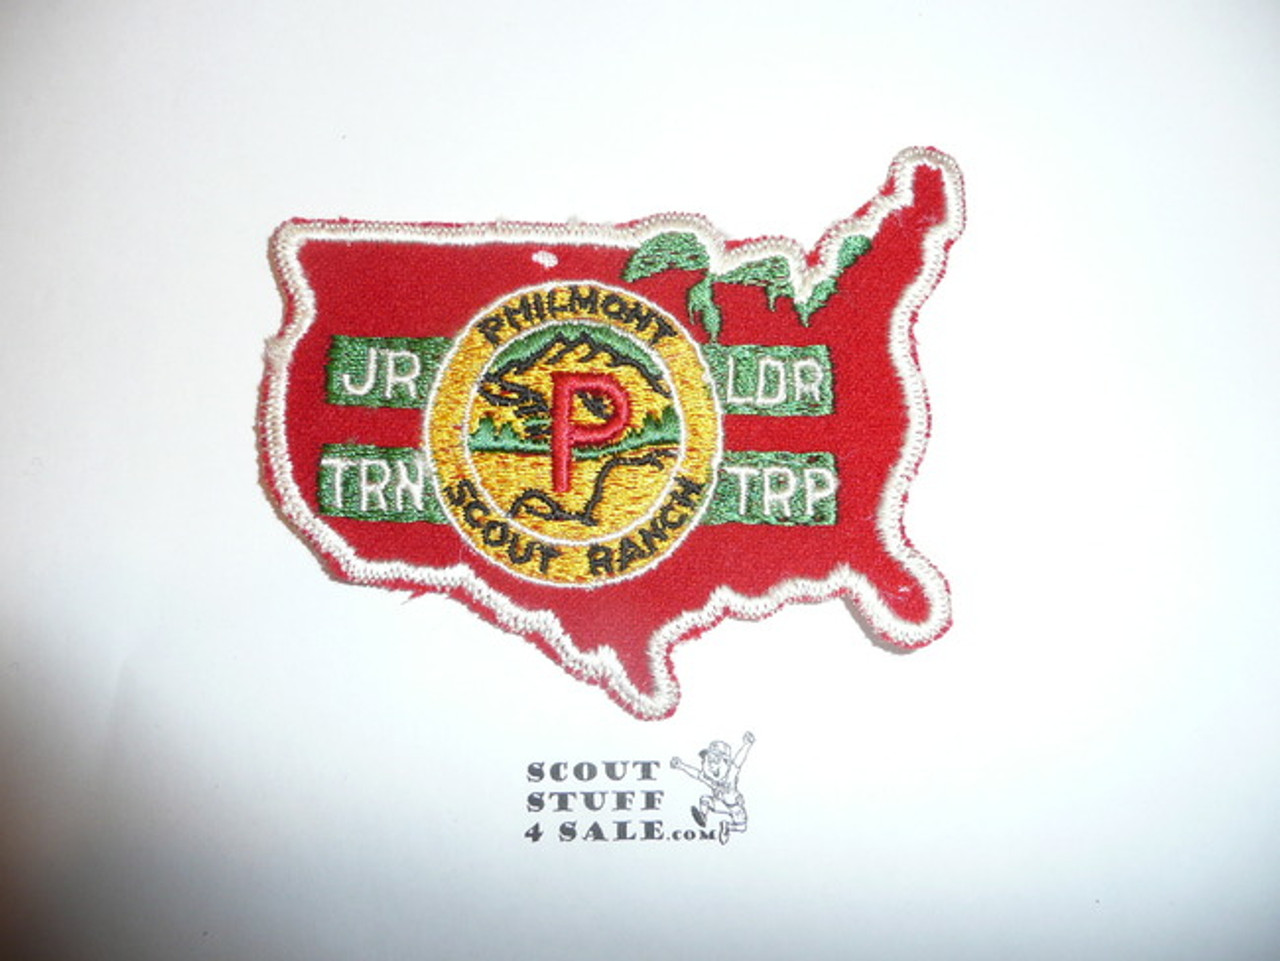 Philmont Scout Ranch, First Junior Leader Training Troop Patch, Shaped Like Outline of USA, Felt, One Small Moth Hole